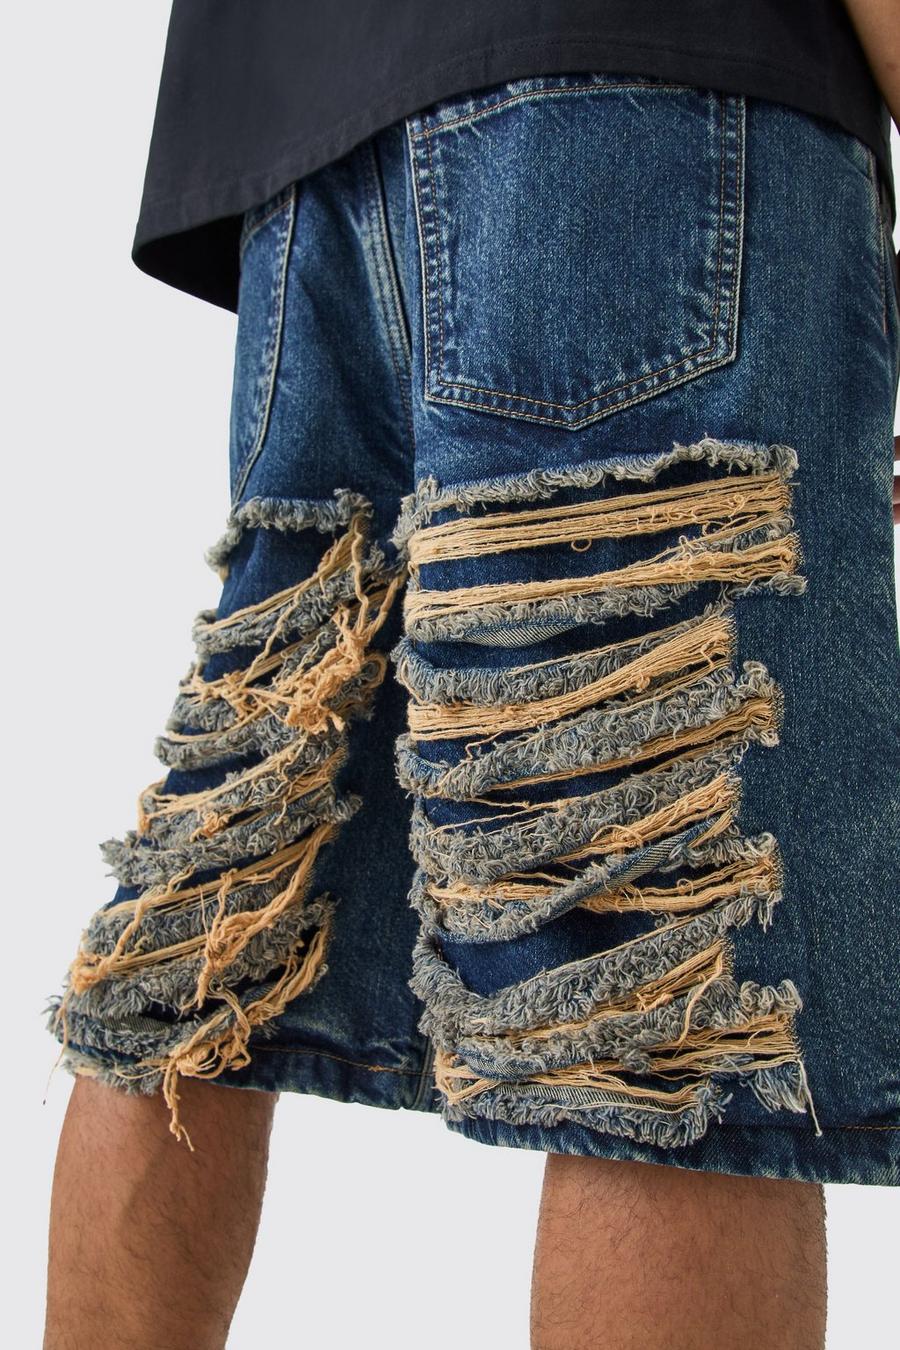 Relaxed Rigid Extreme Ripped Denim Jorts In Antique Blue